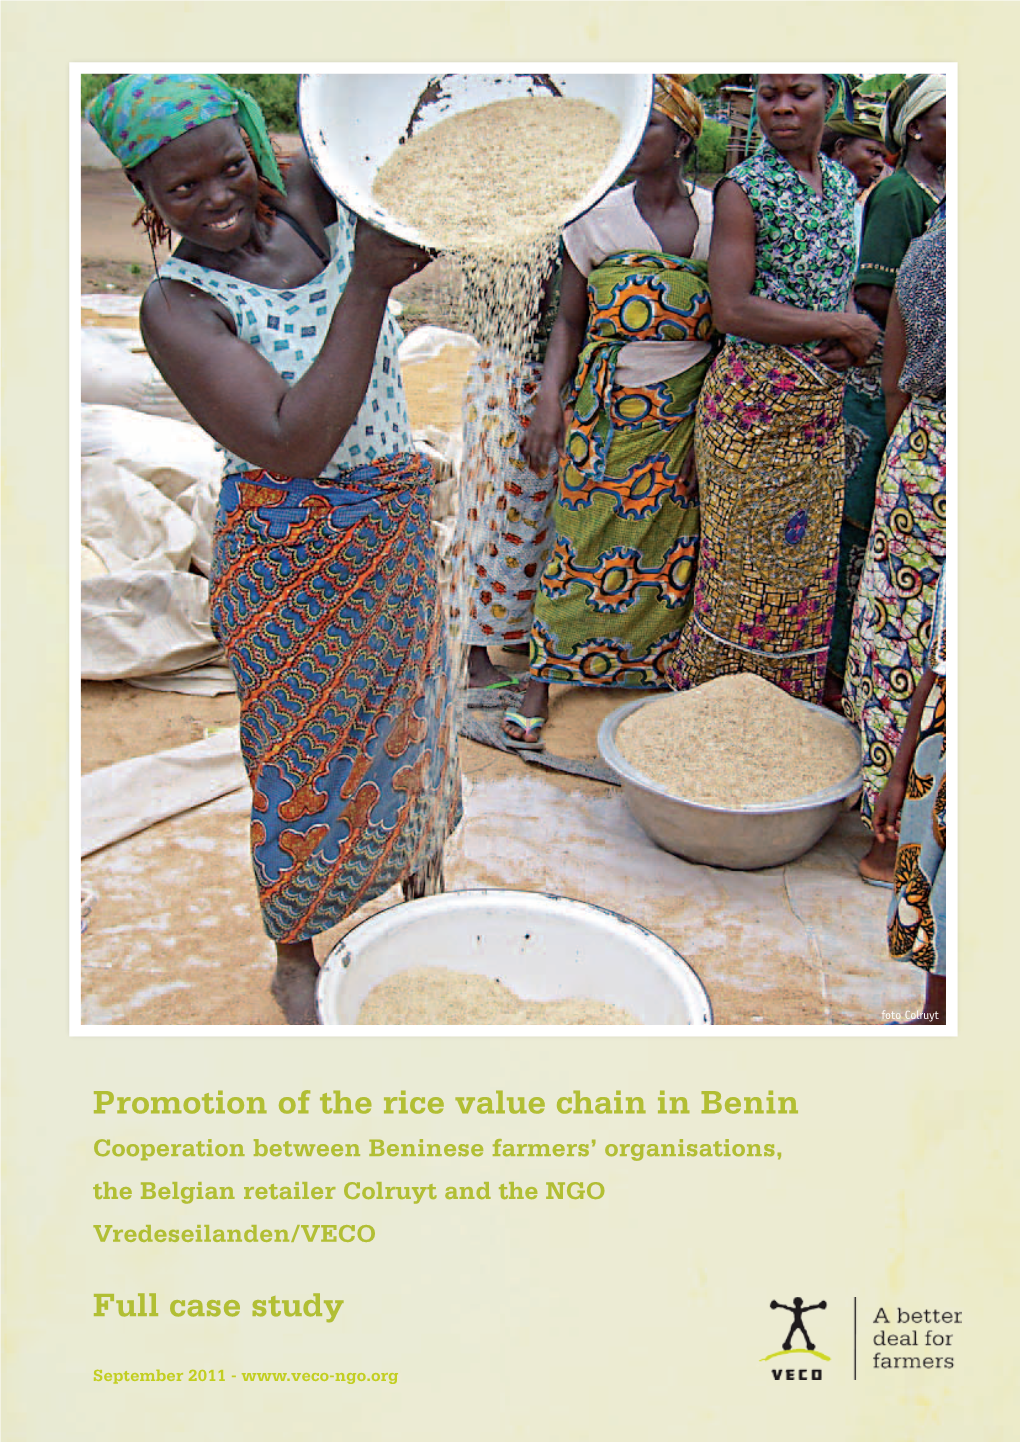 Promotion of the Rice Value Chain in Benin Cooperation Between Beninese Farmers’ Organisations, the Belgian Retailer Colruyt and the NGO Vredeseilanden/VECO